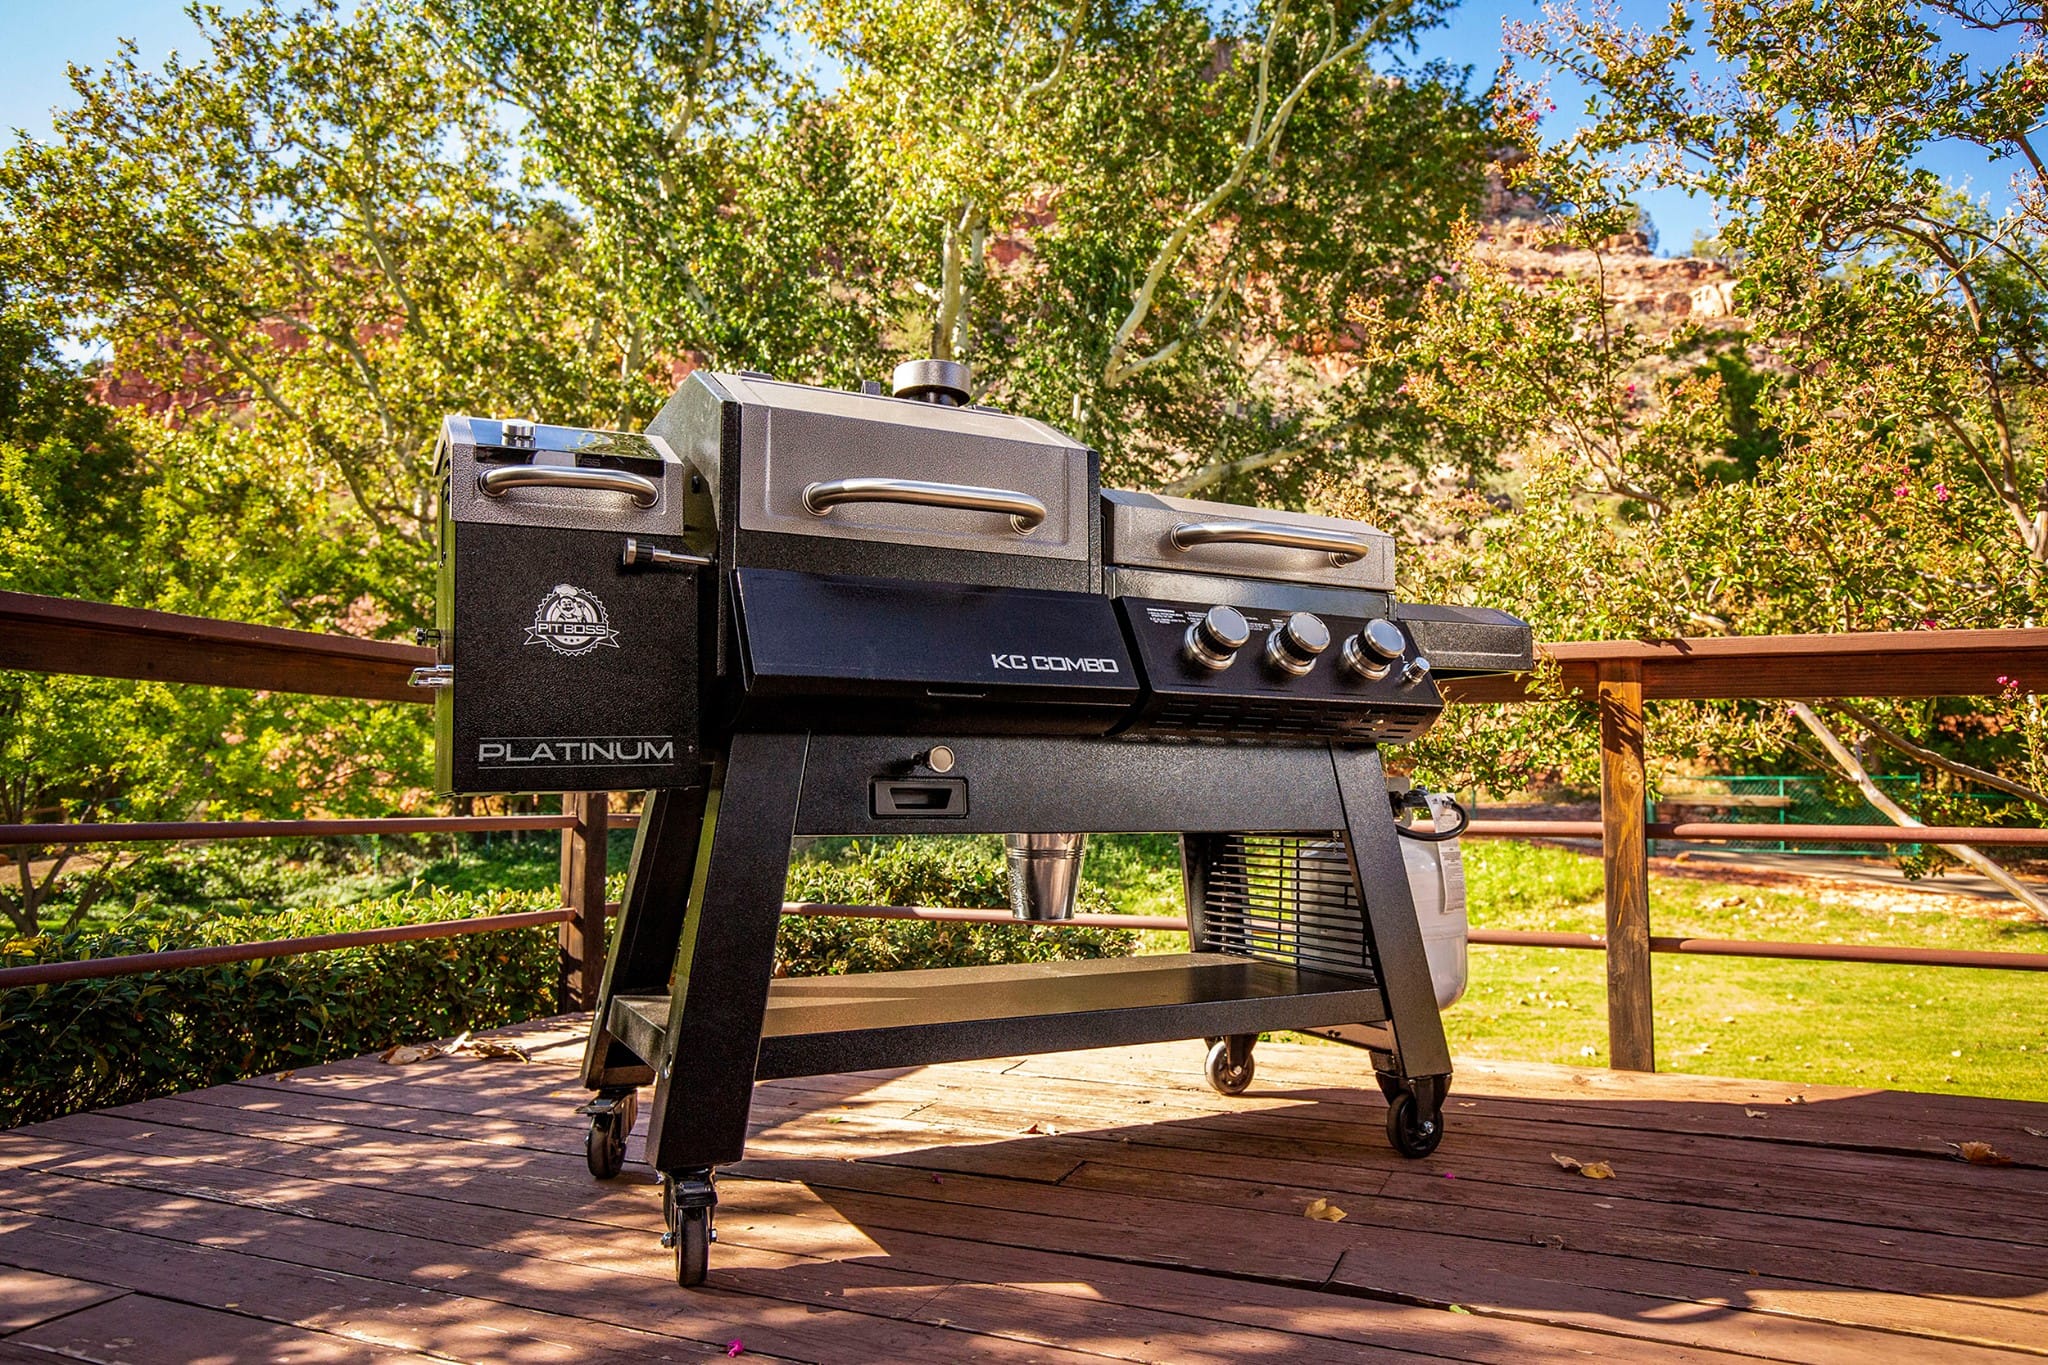 What Makes A Pit Boss Grill Unique As A Wood-Fired Pellet Grill?